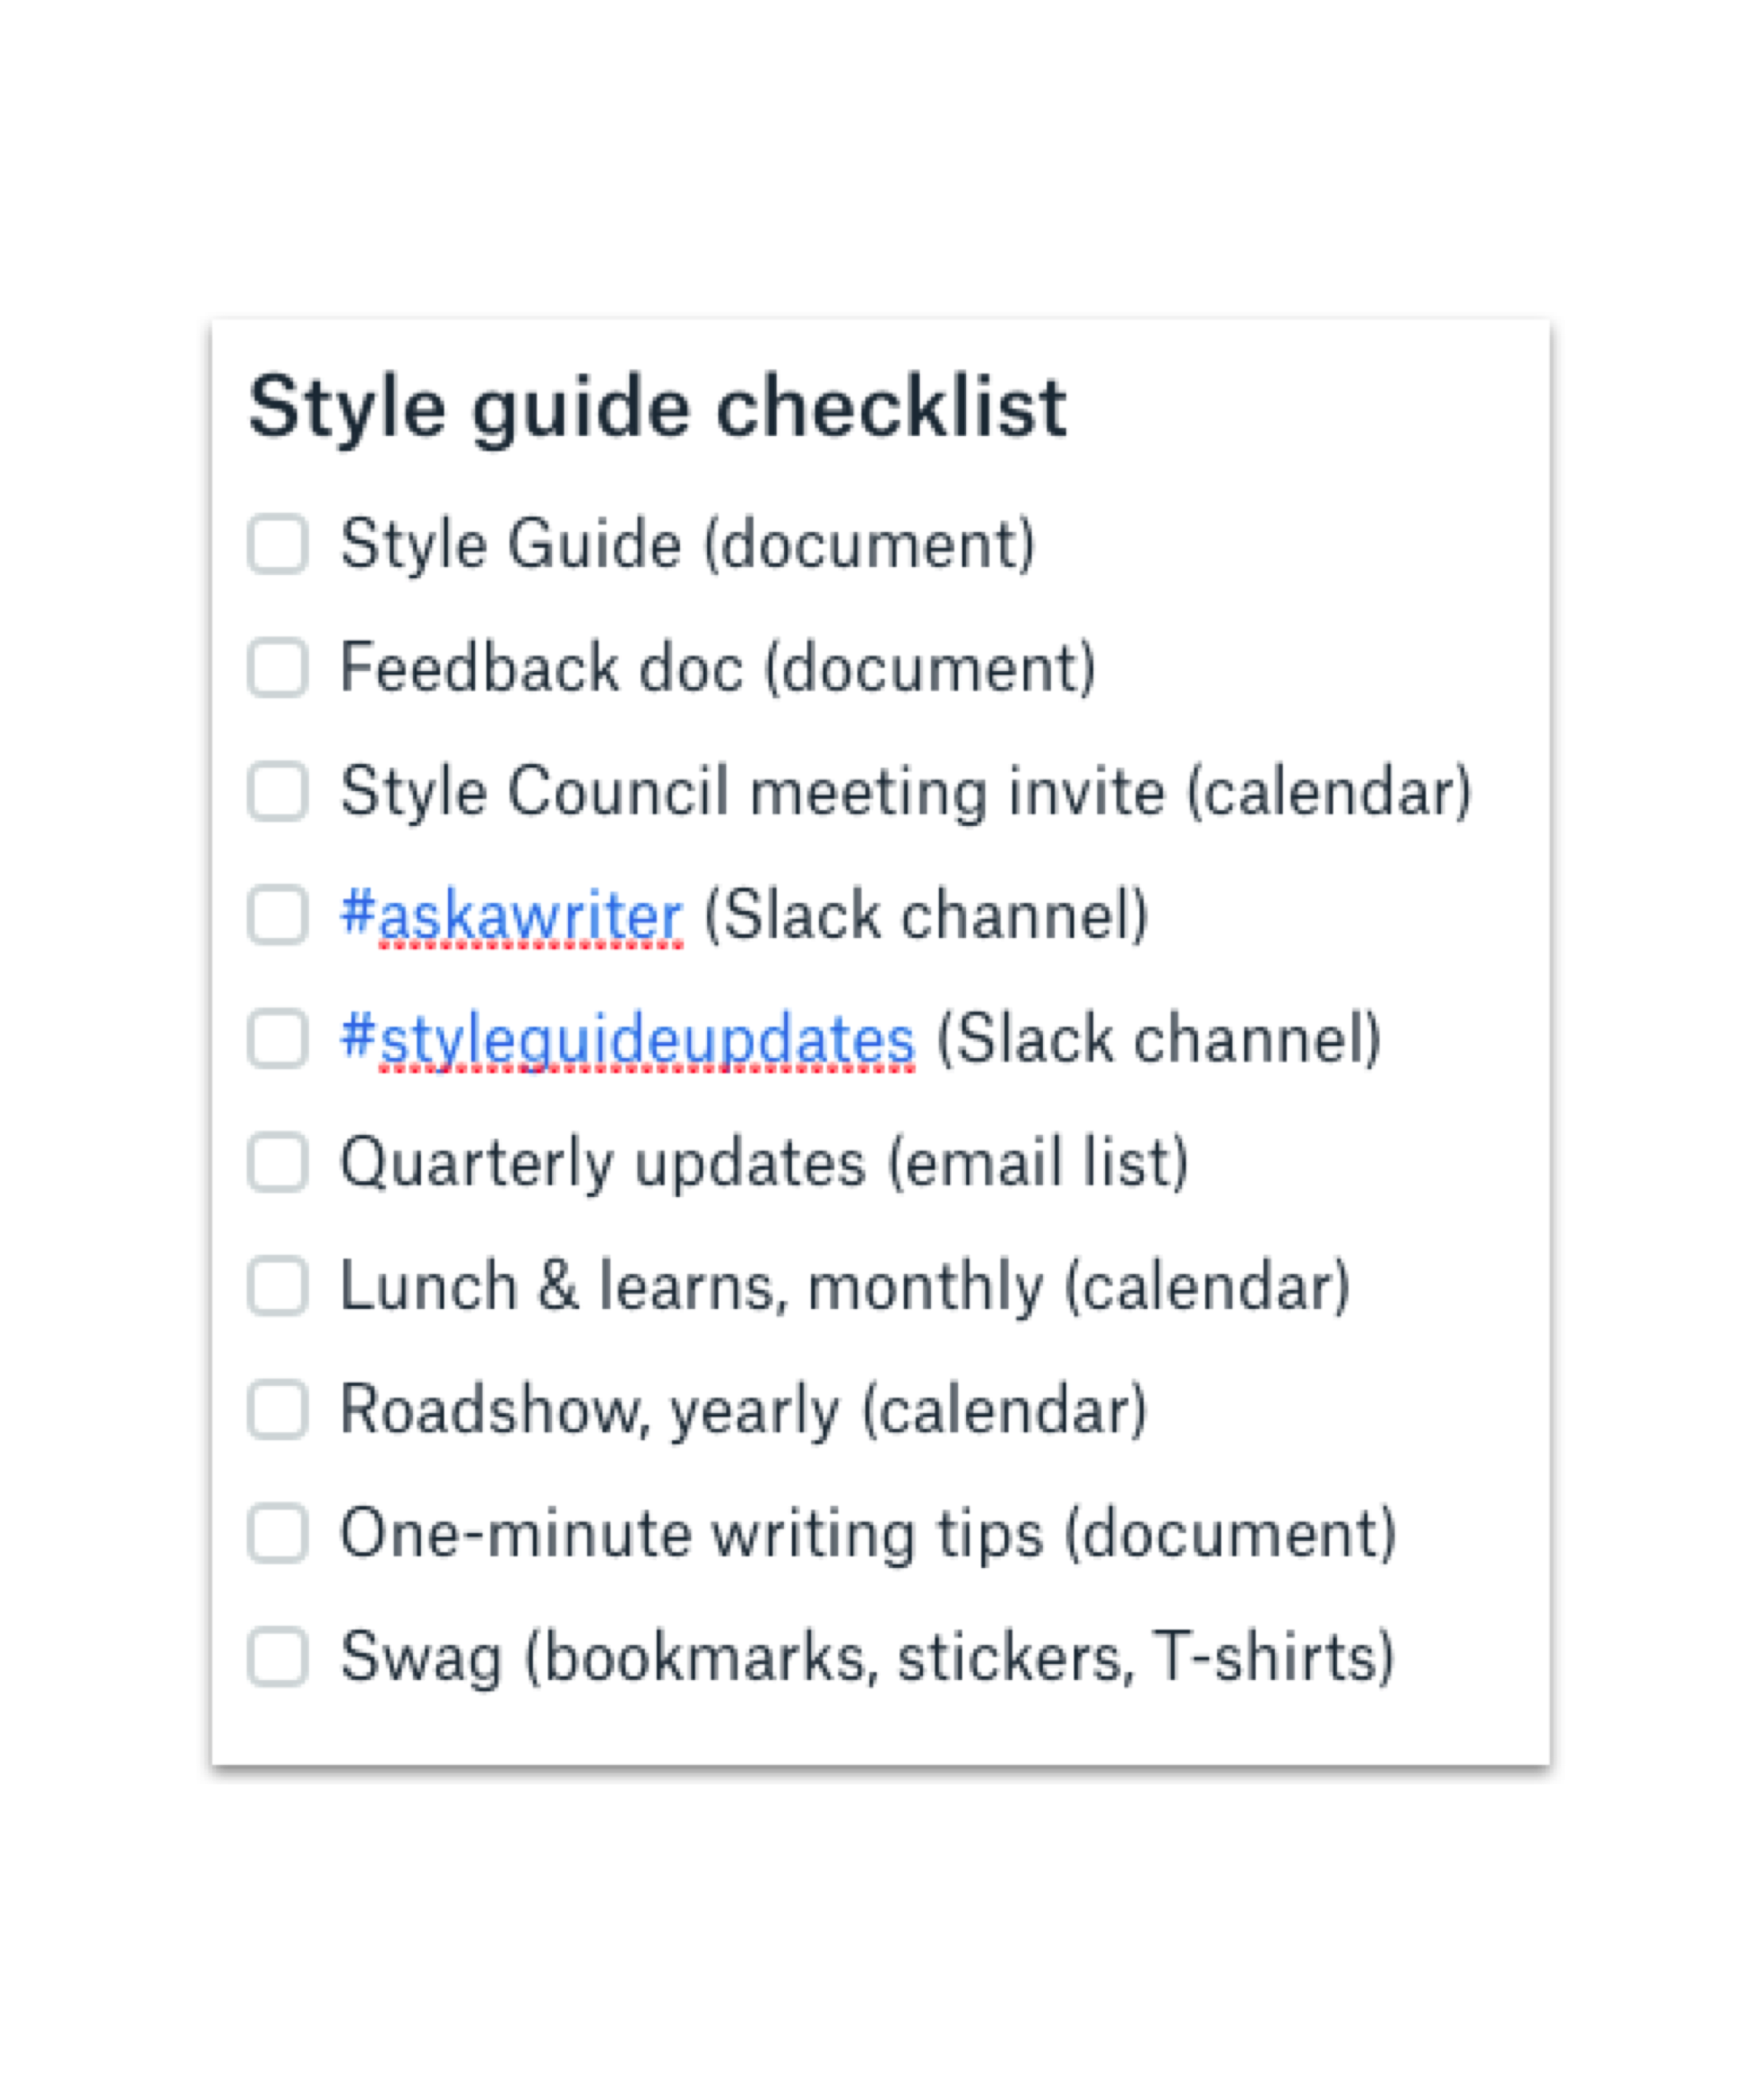 Example of a style guide governance checklist